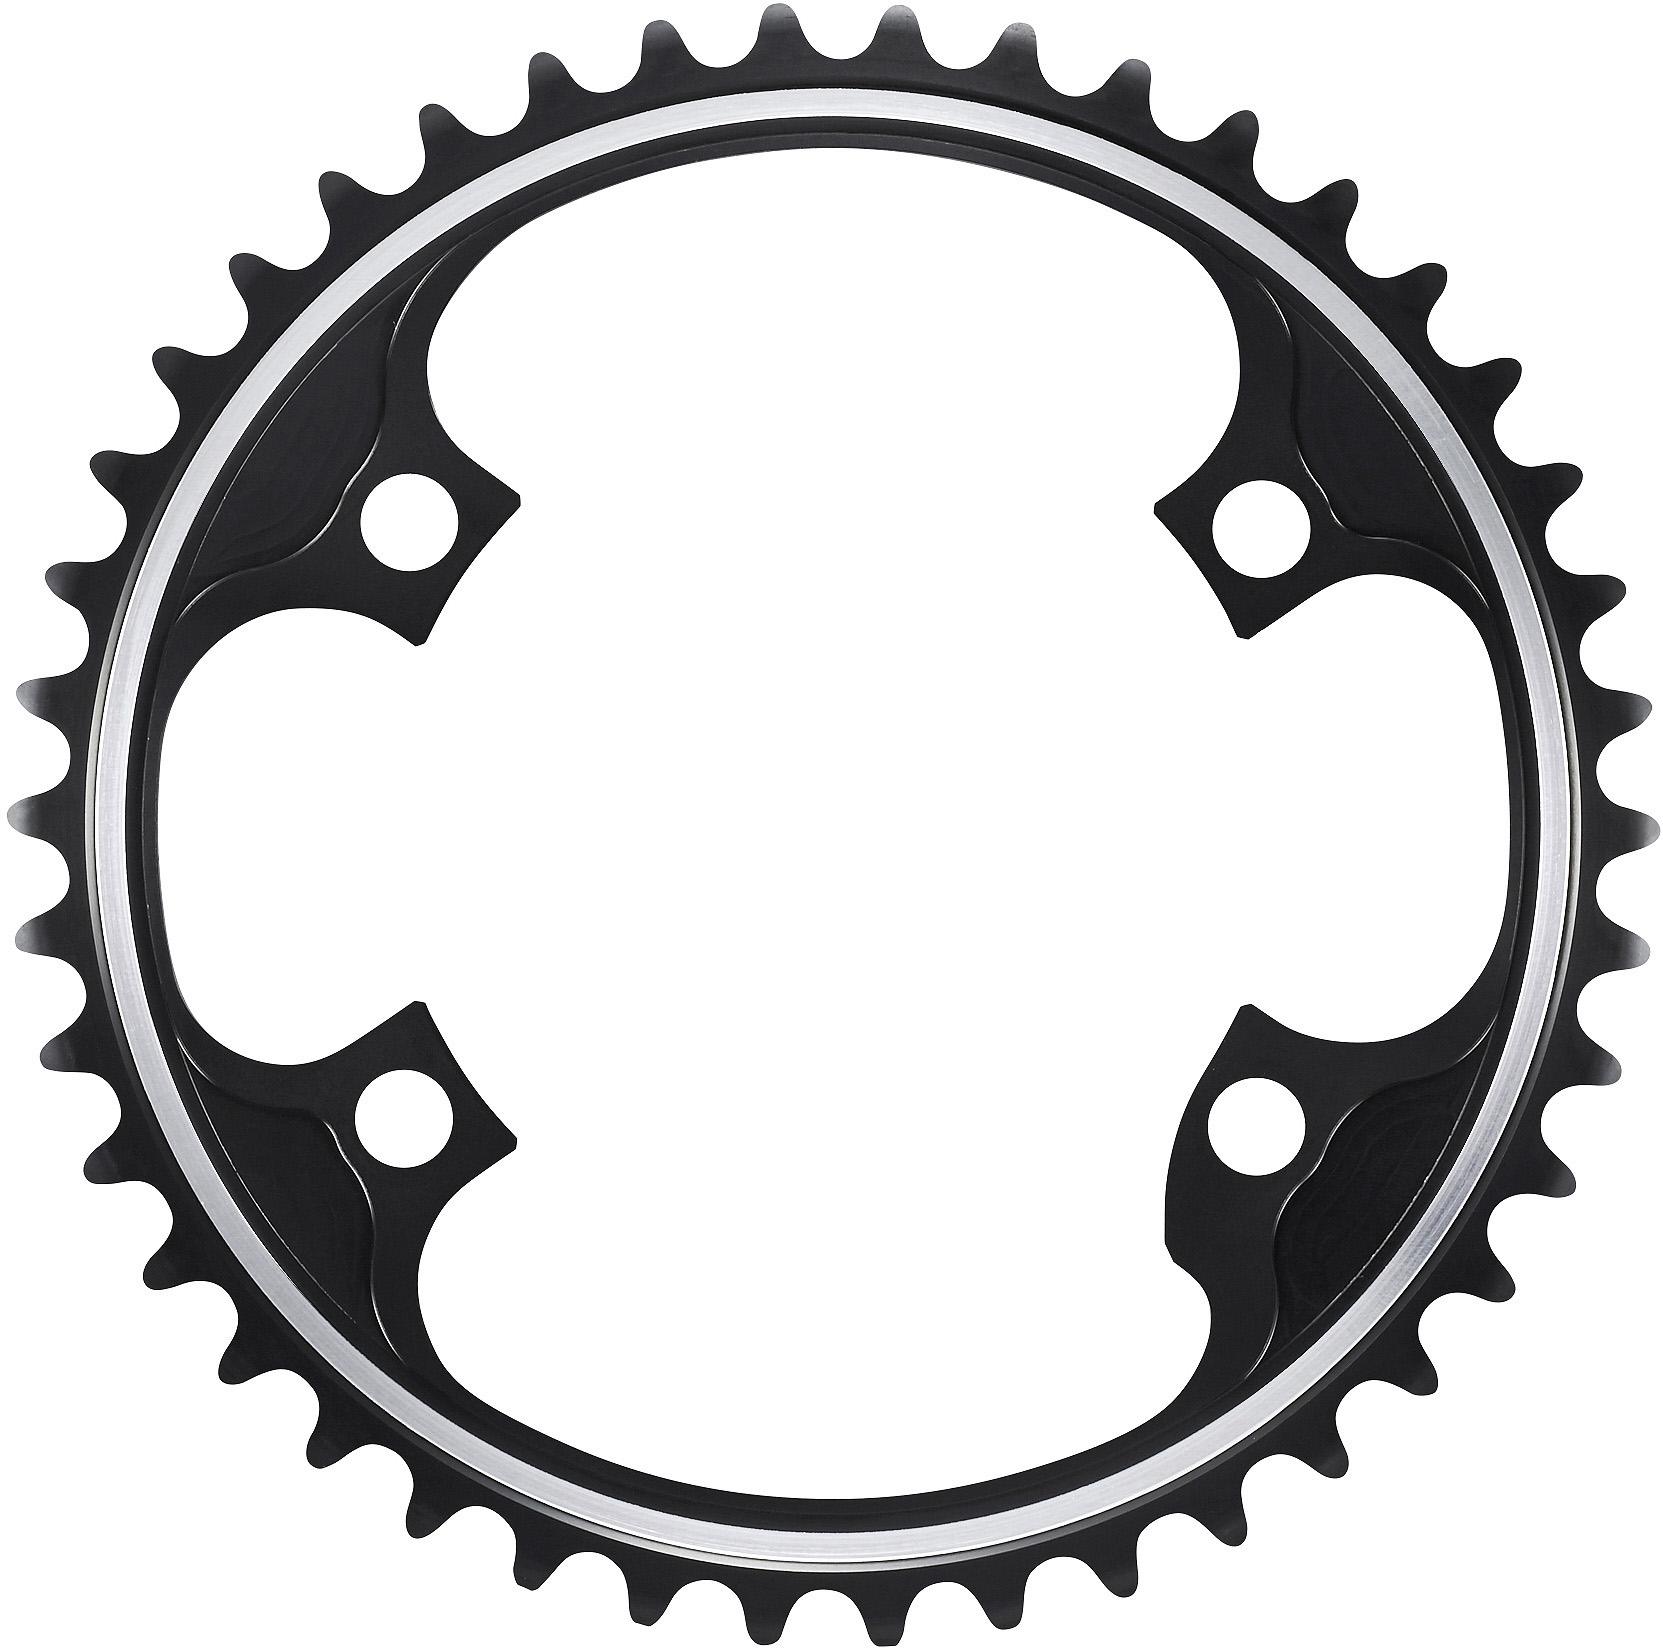 Fc-R9100 Chainring 42T-Mx For 54-42T